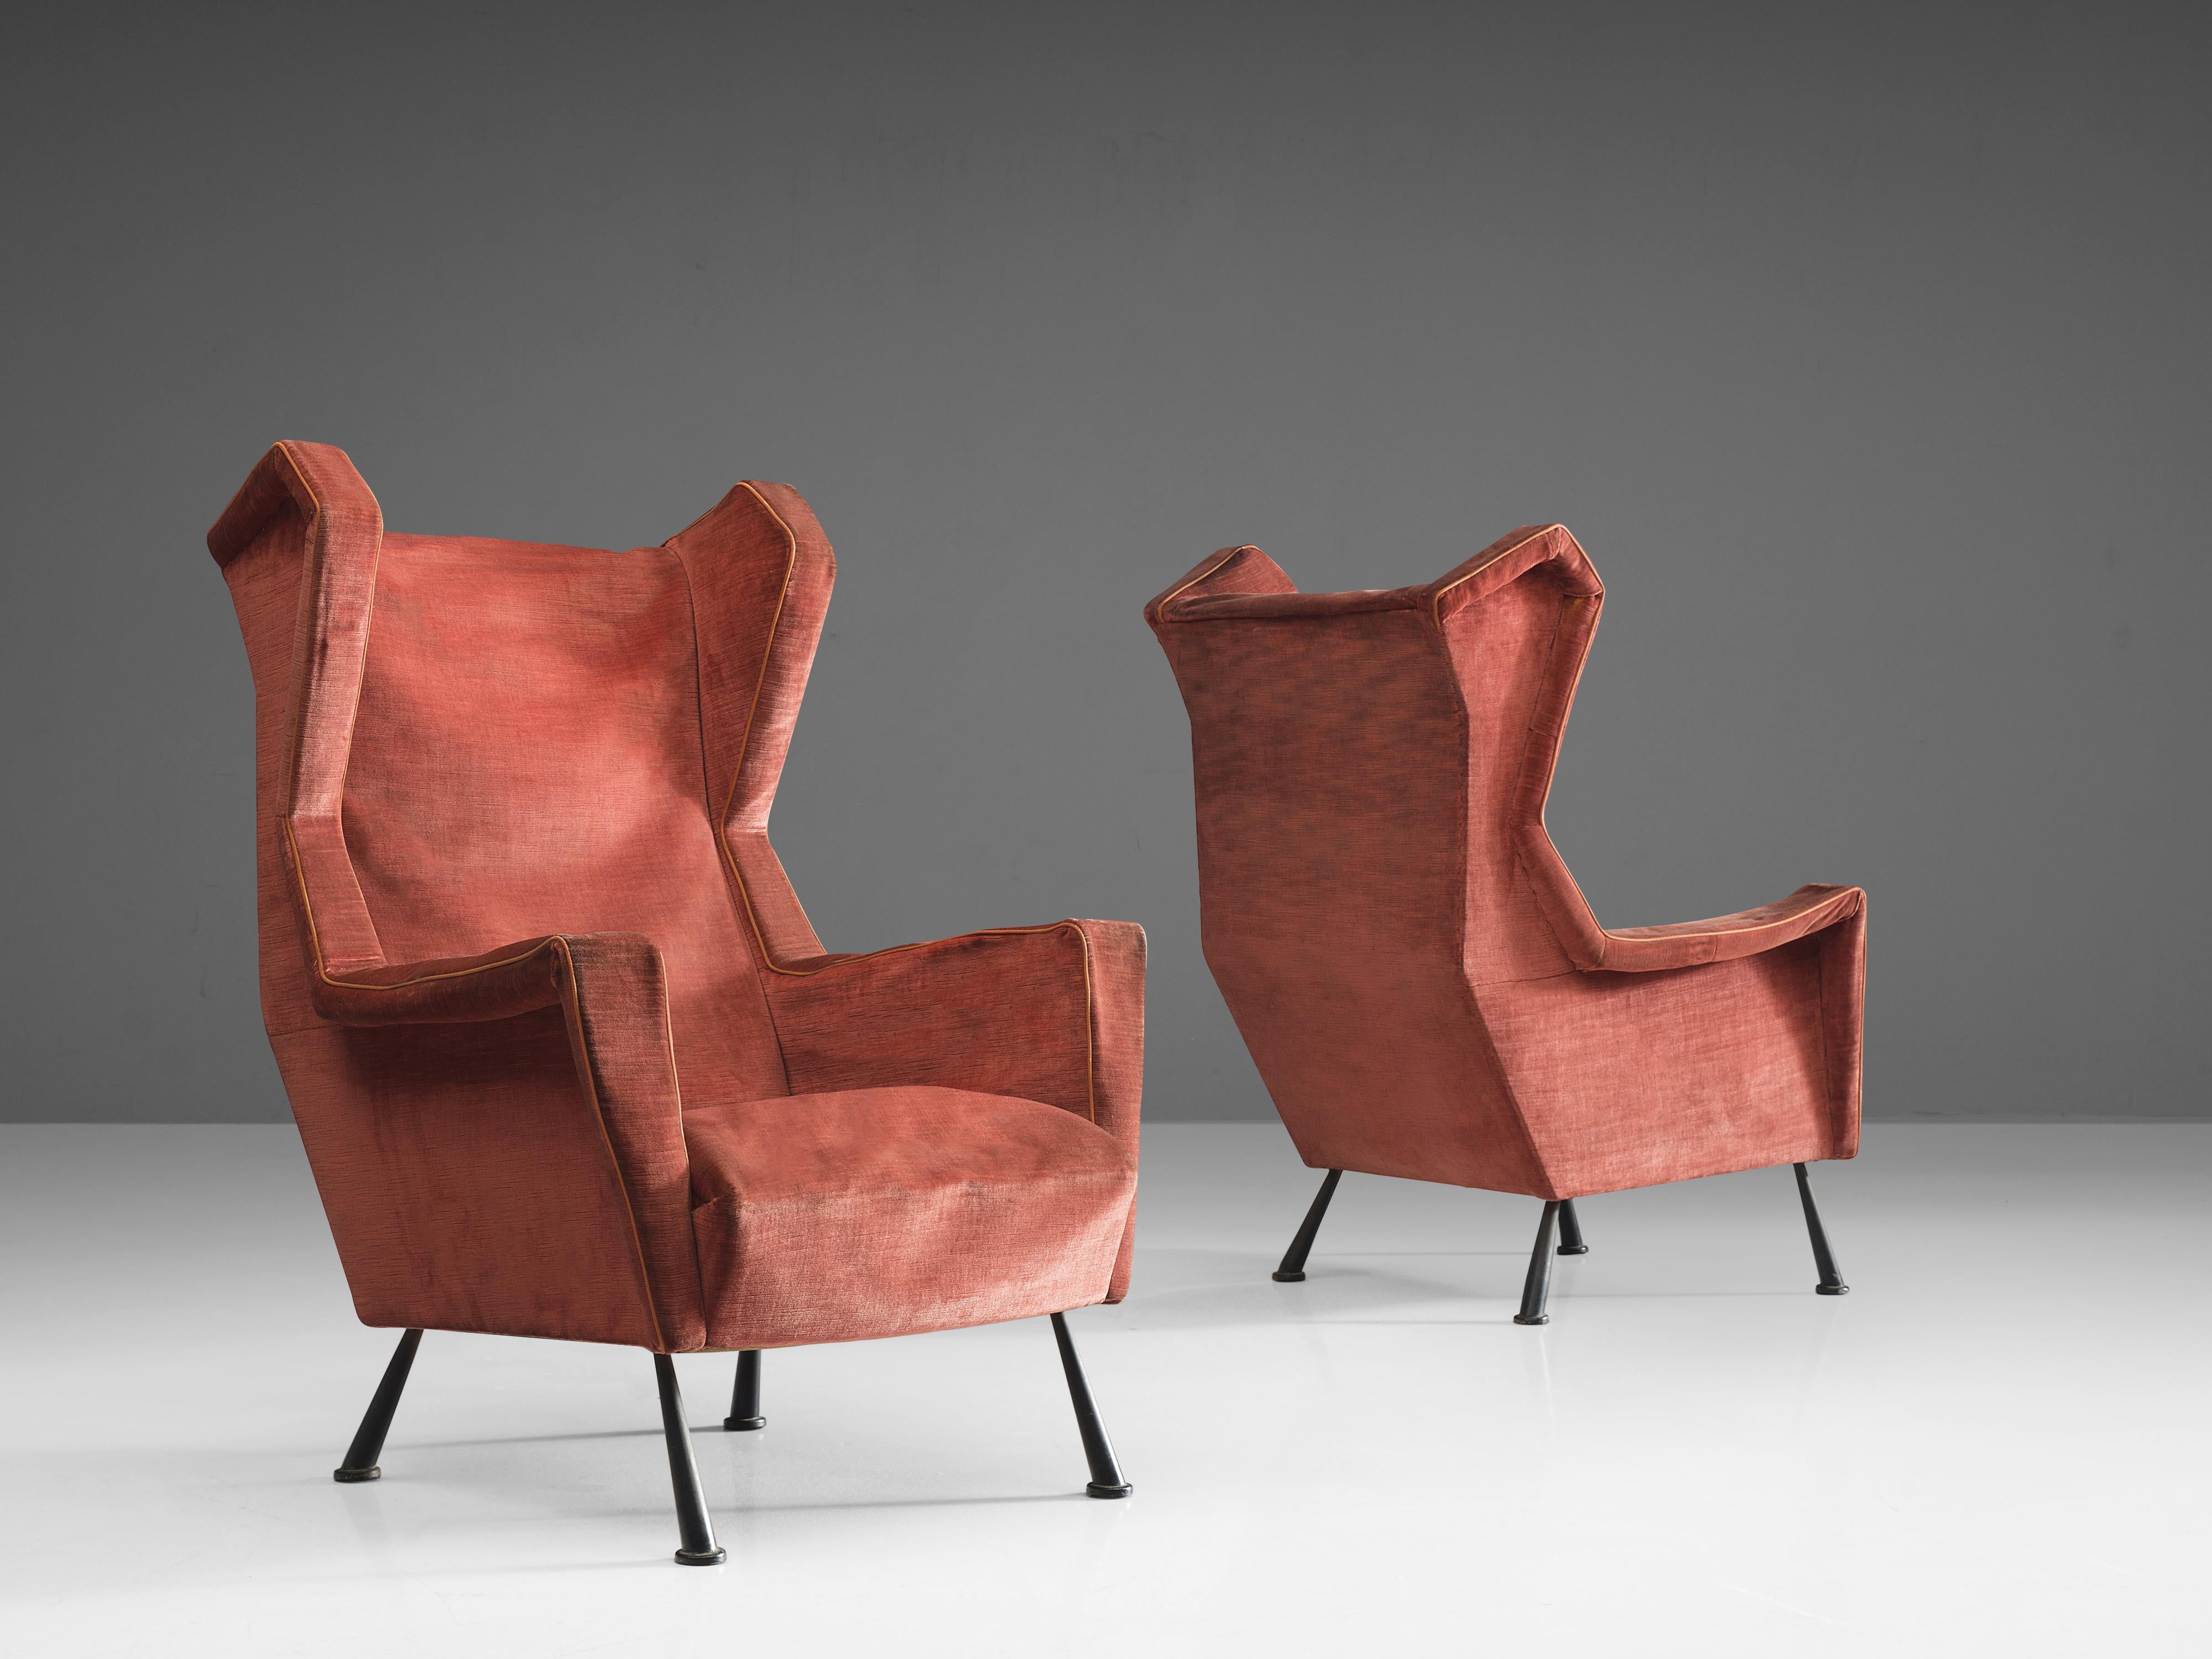 Lounge chairs, red fabric velvet, black metal, Italy, ca. 1950.

This set of angular lounge chairs is both voluptuous and grand as they are comfortable. The chairs have semi high wingbacks and feature red fabric with small tapered black metal legs.